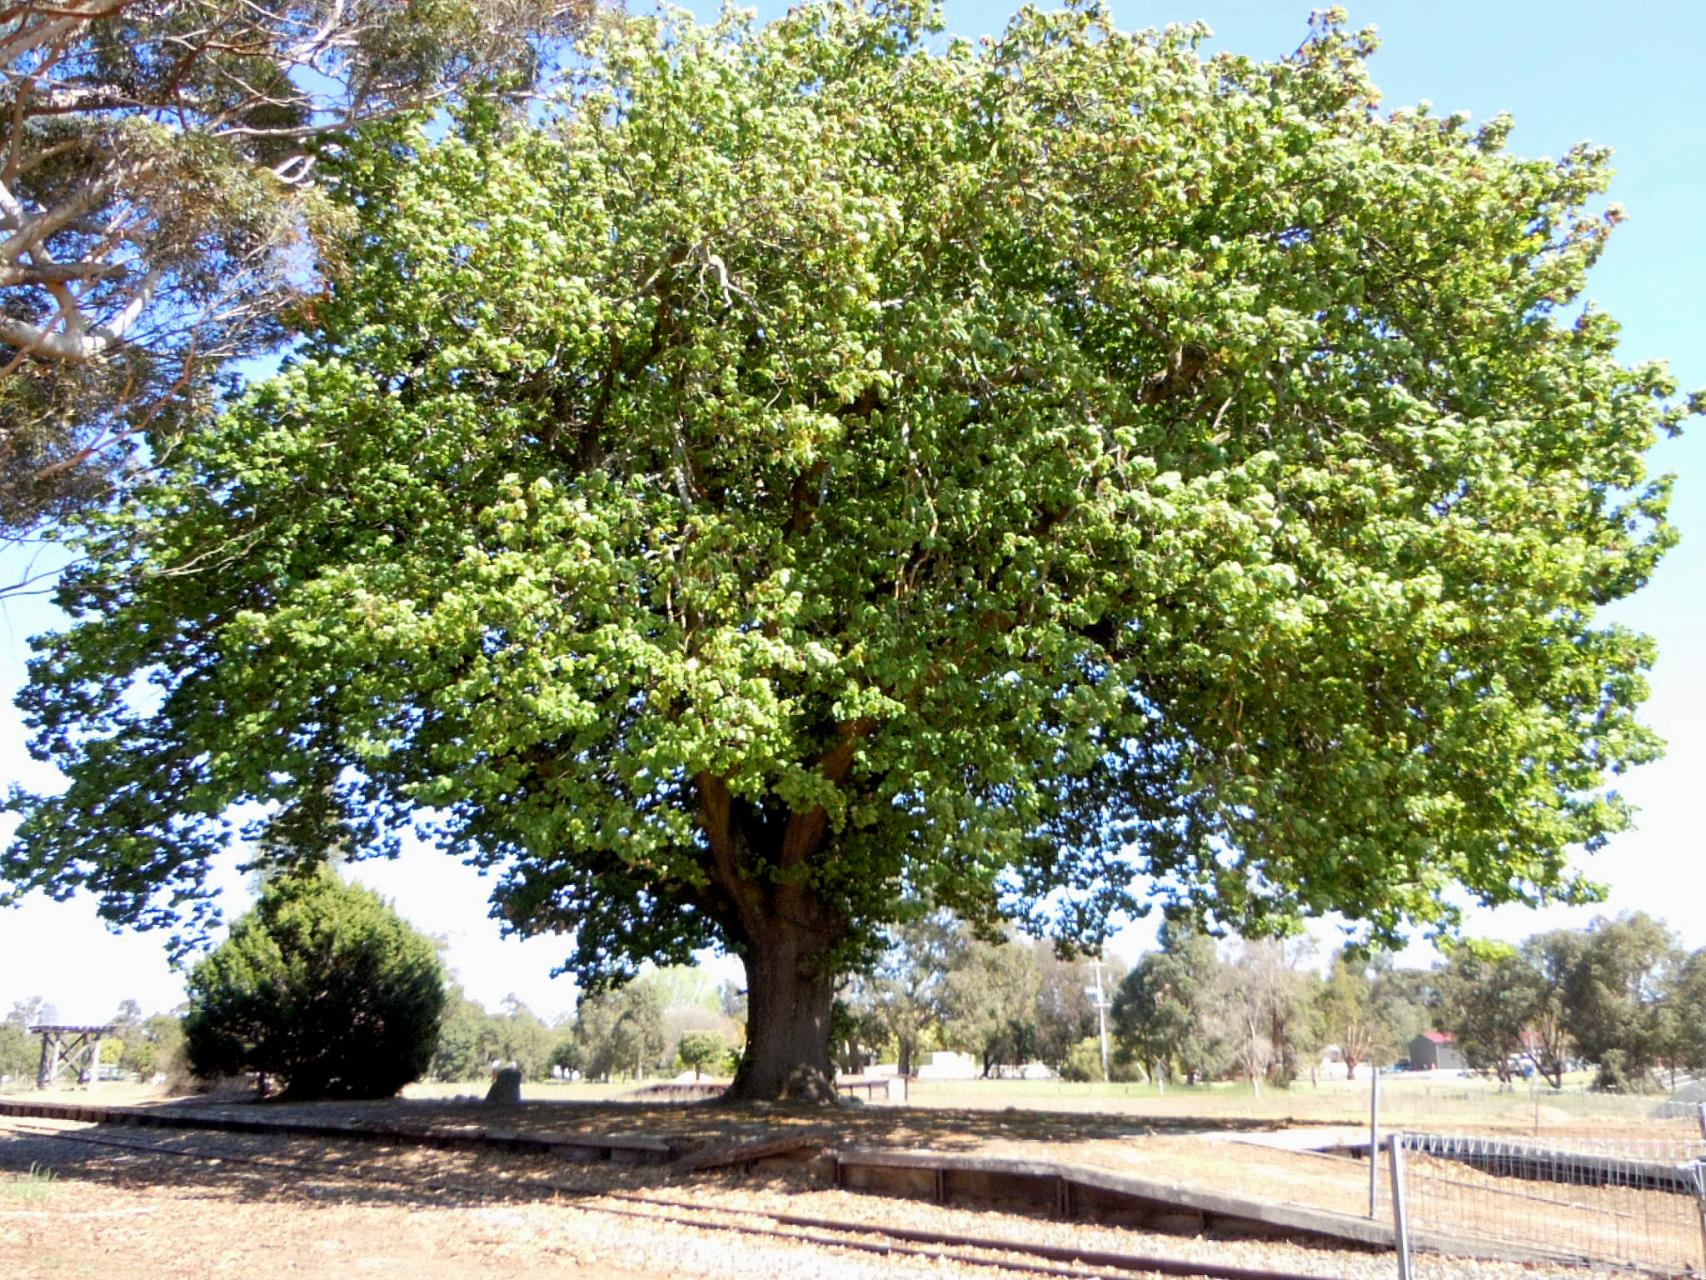 Large tree sitting next to a smaller tree in a paddock